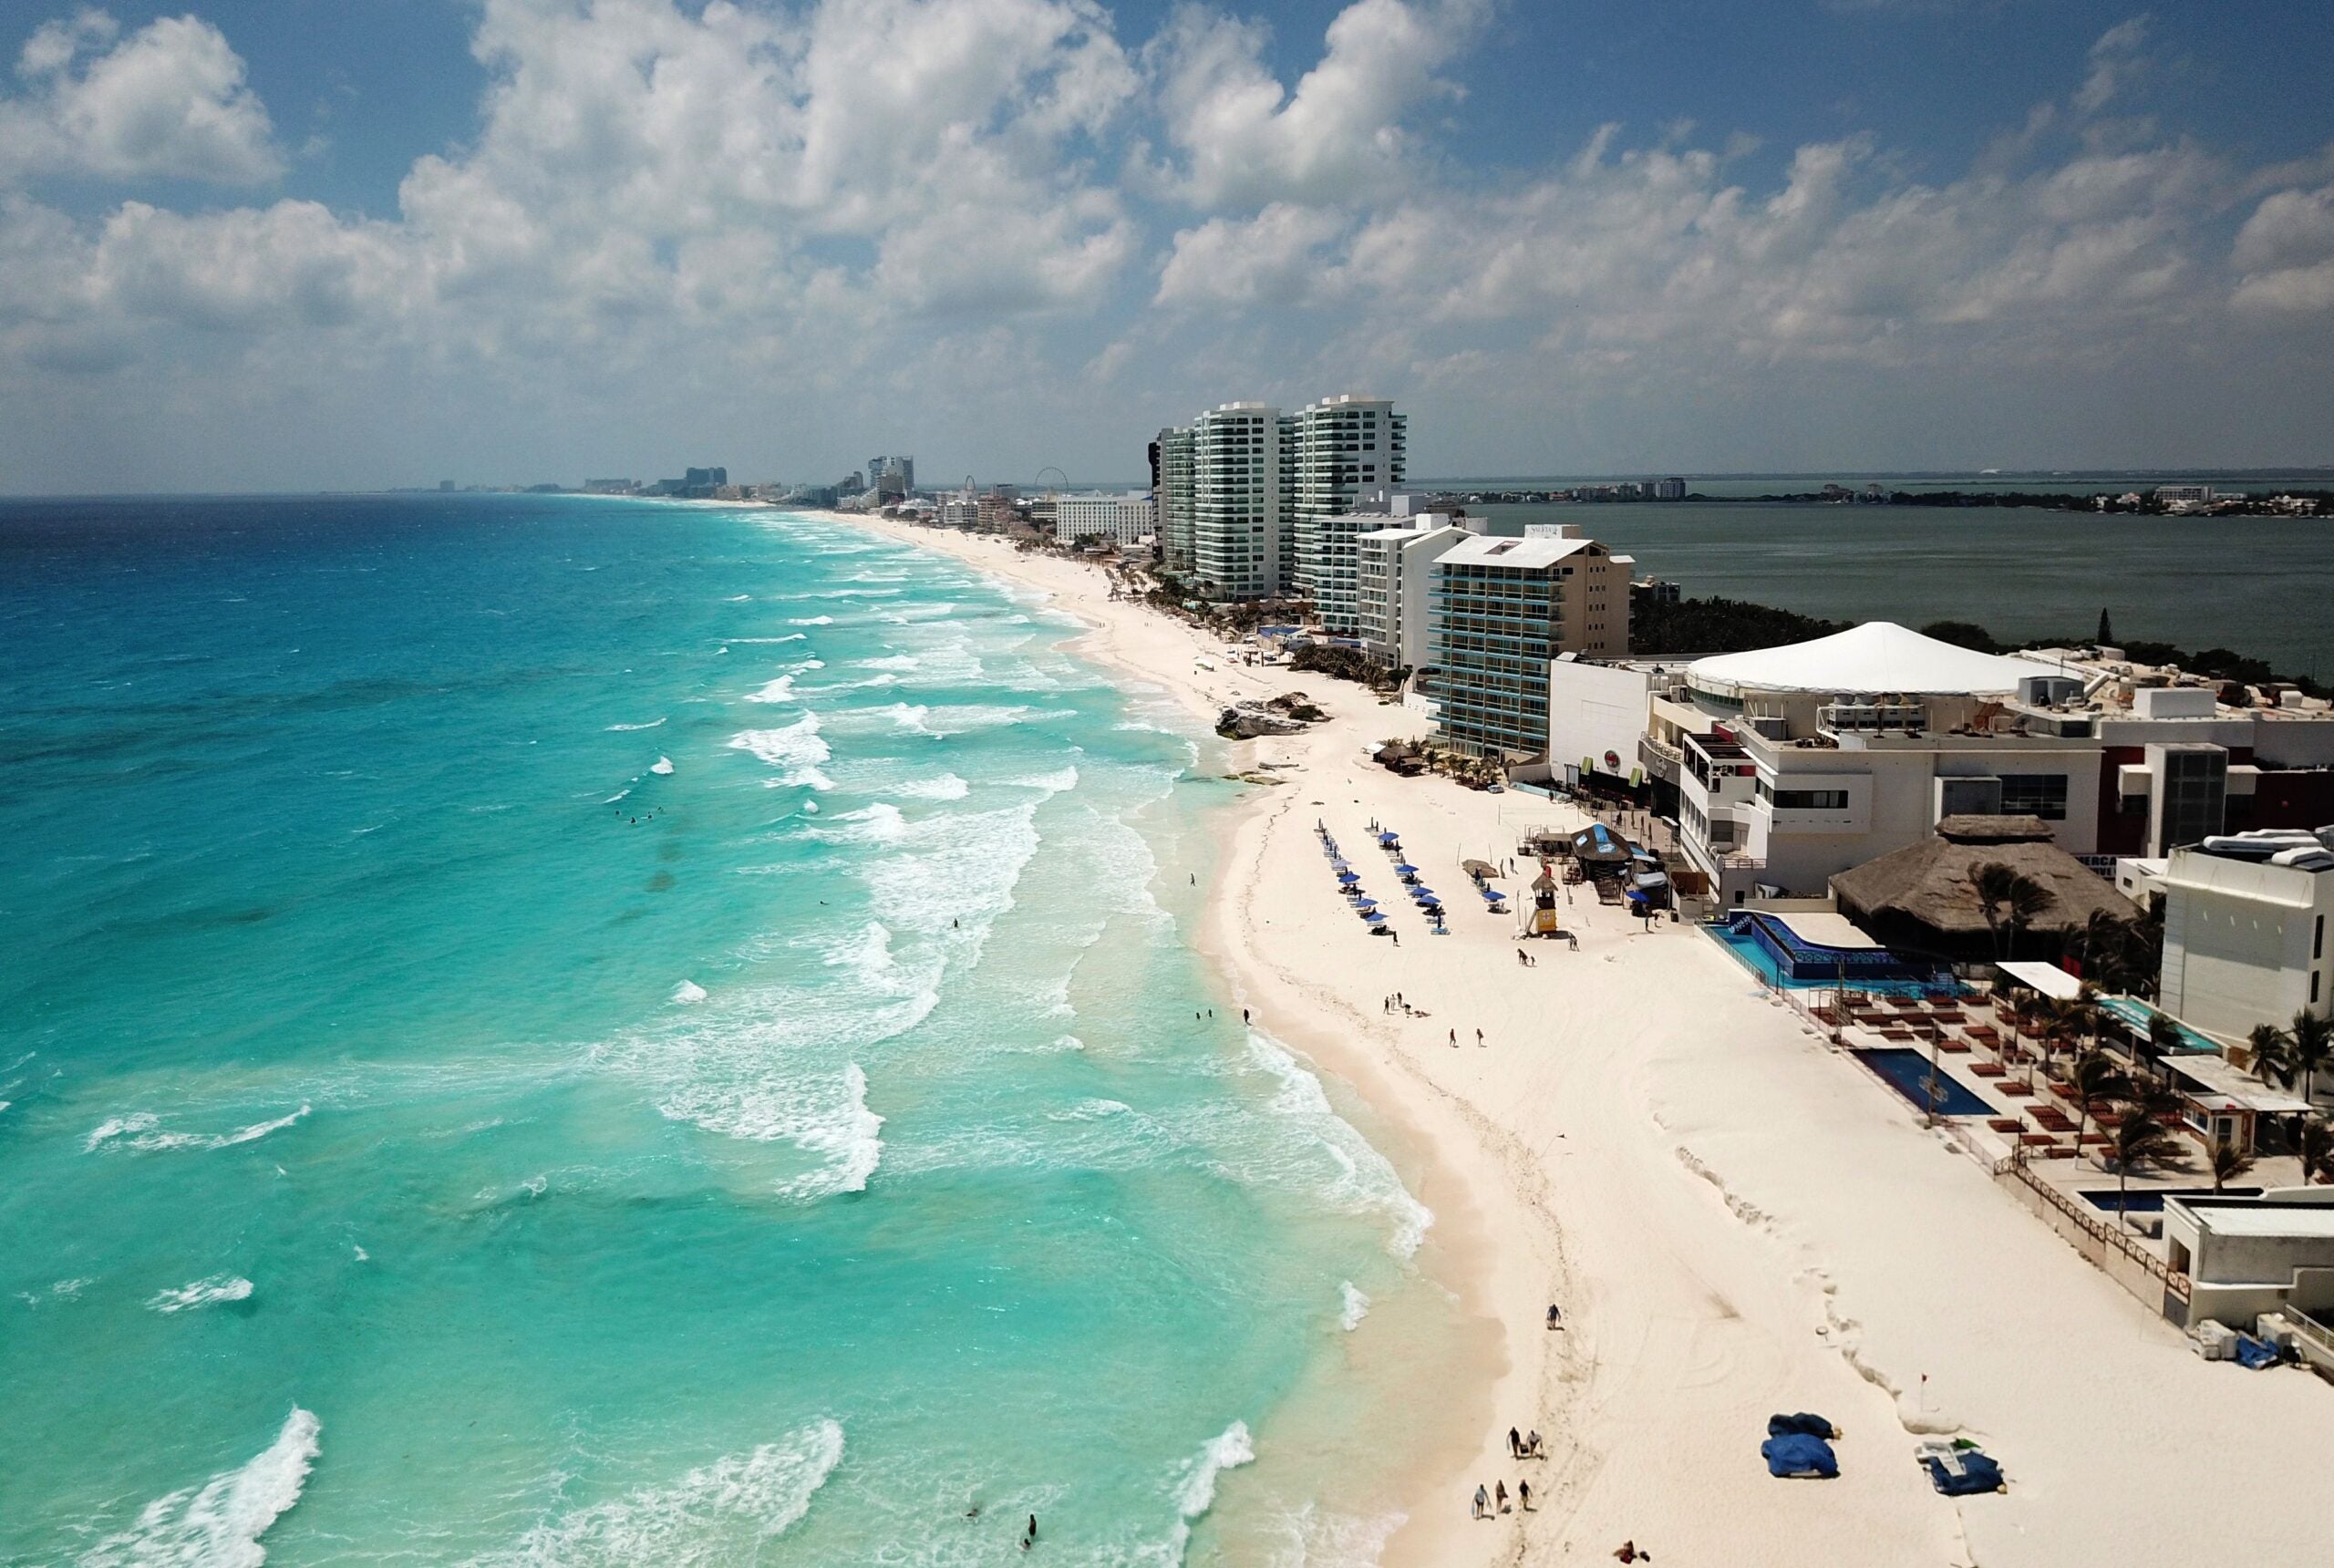 Aerial view of an almost empty beach in Cancun, Quintana Roo state, Mexico, on March 28, 2020. - A significant drop in the number of tourists is registered in Mexico's resorts due to the novel coronavirus pandemic. (Photo by ELIZABETH RUIZ / AFP) (Photo by ELIZABETH RUIZ/AFP via Getty Images)